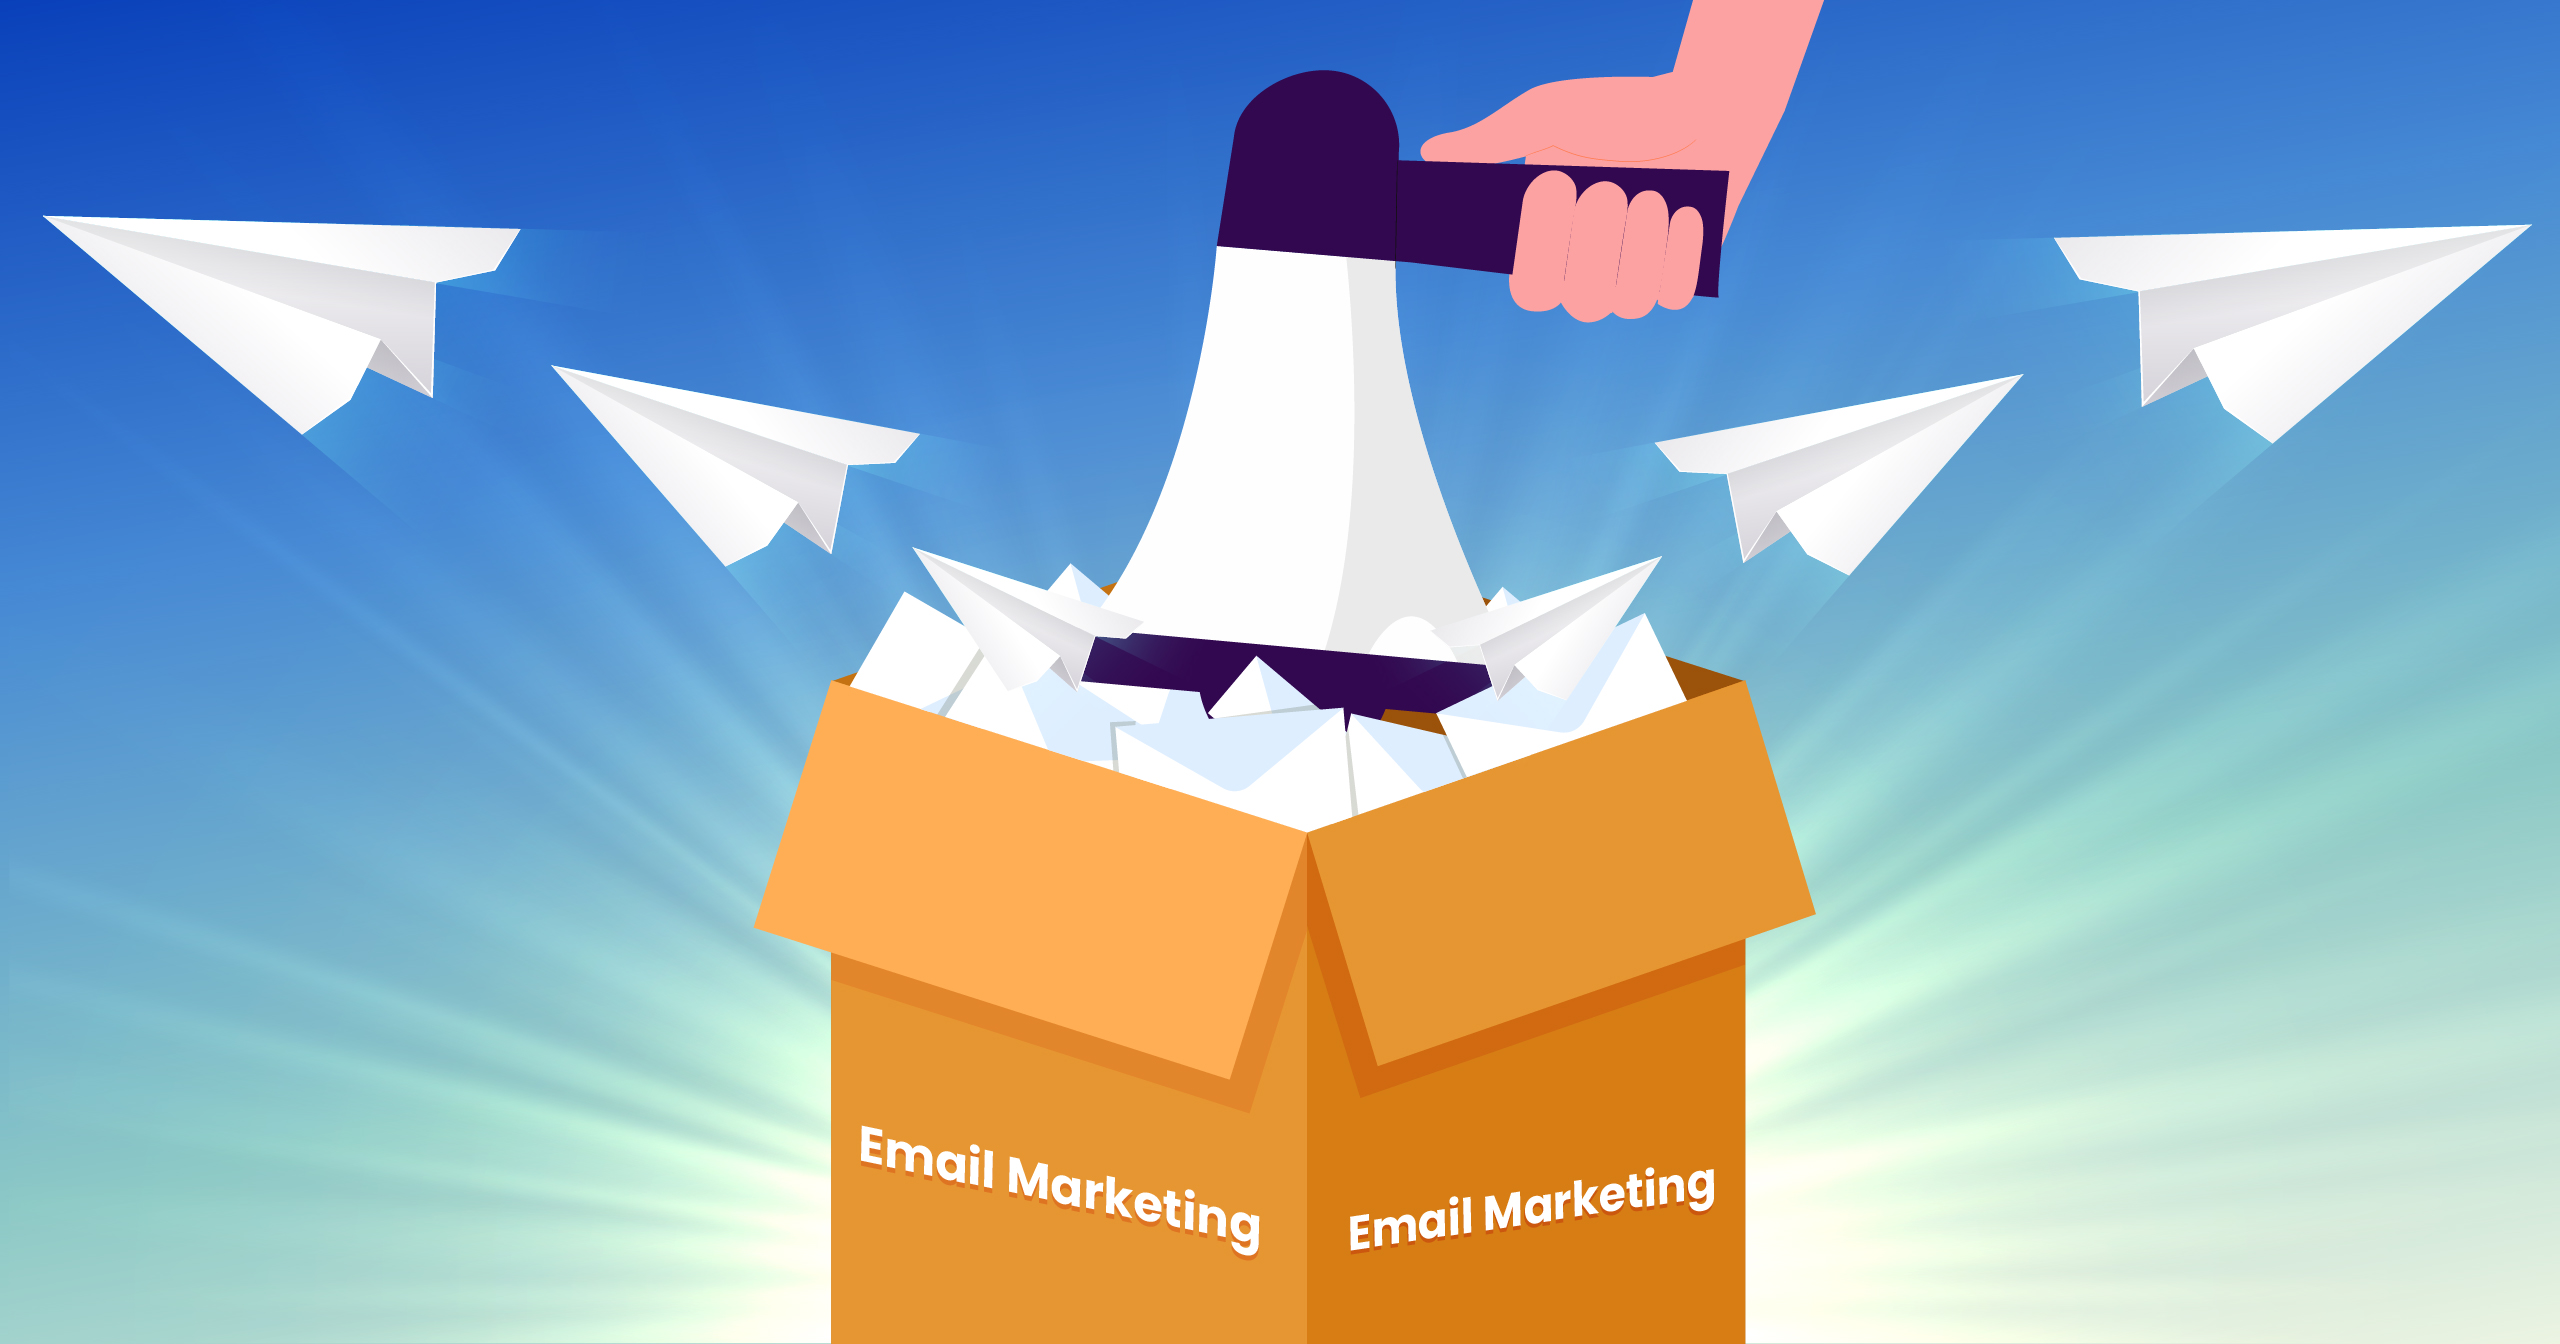 Email Marketing 101: How to Get Started and Grow Your List